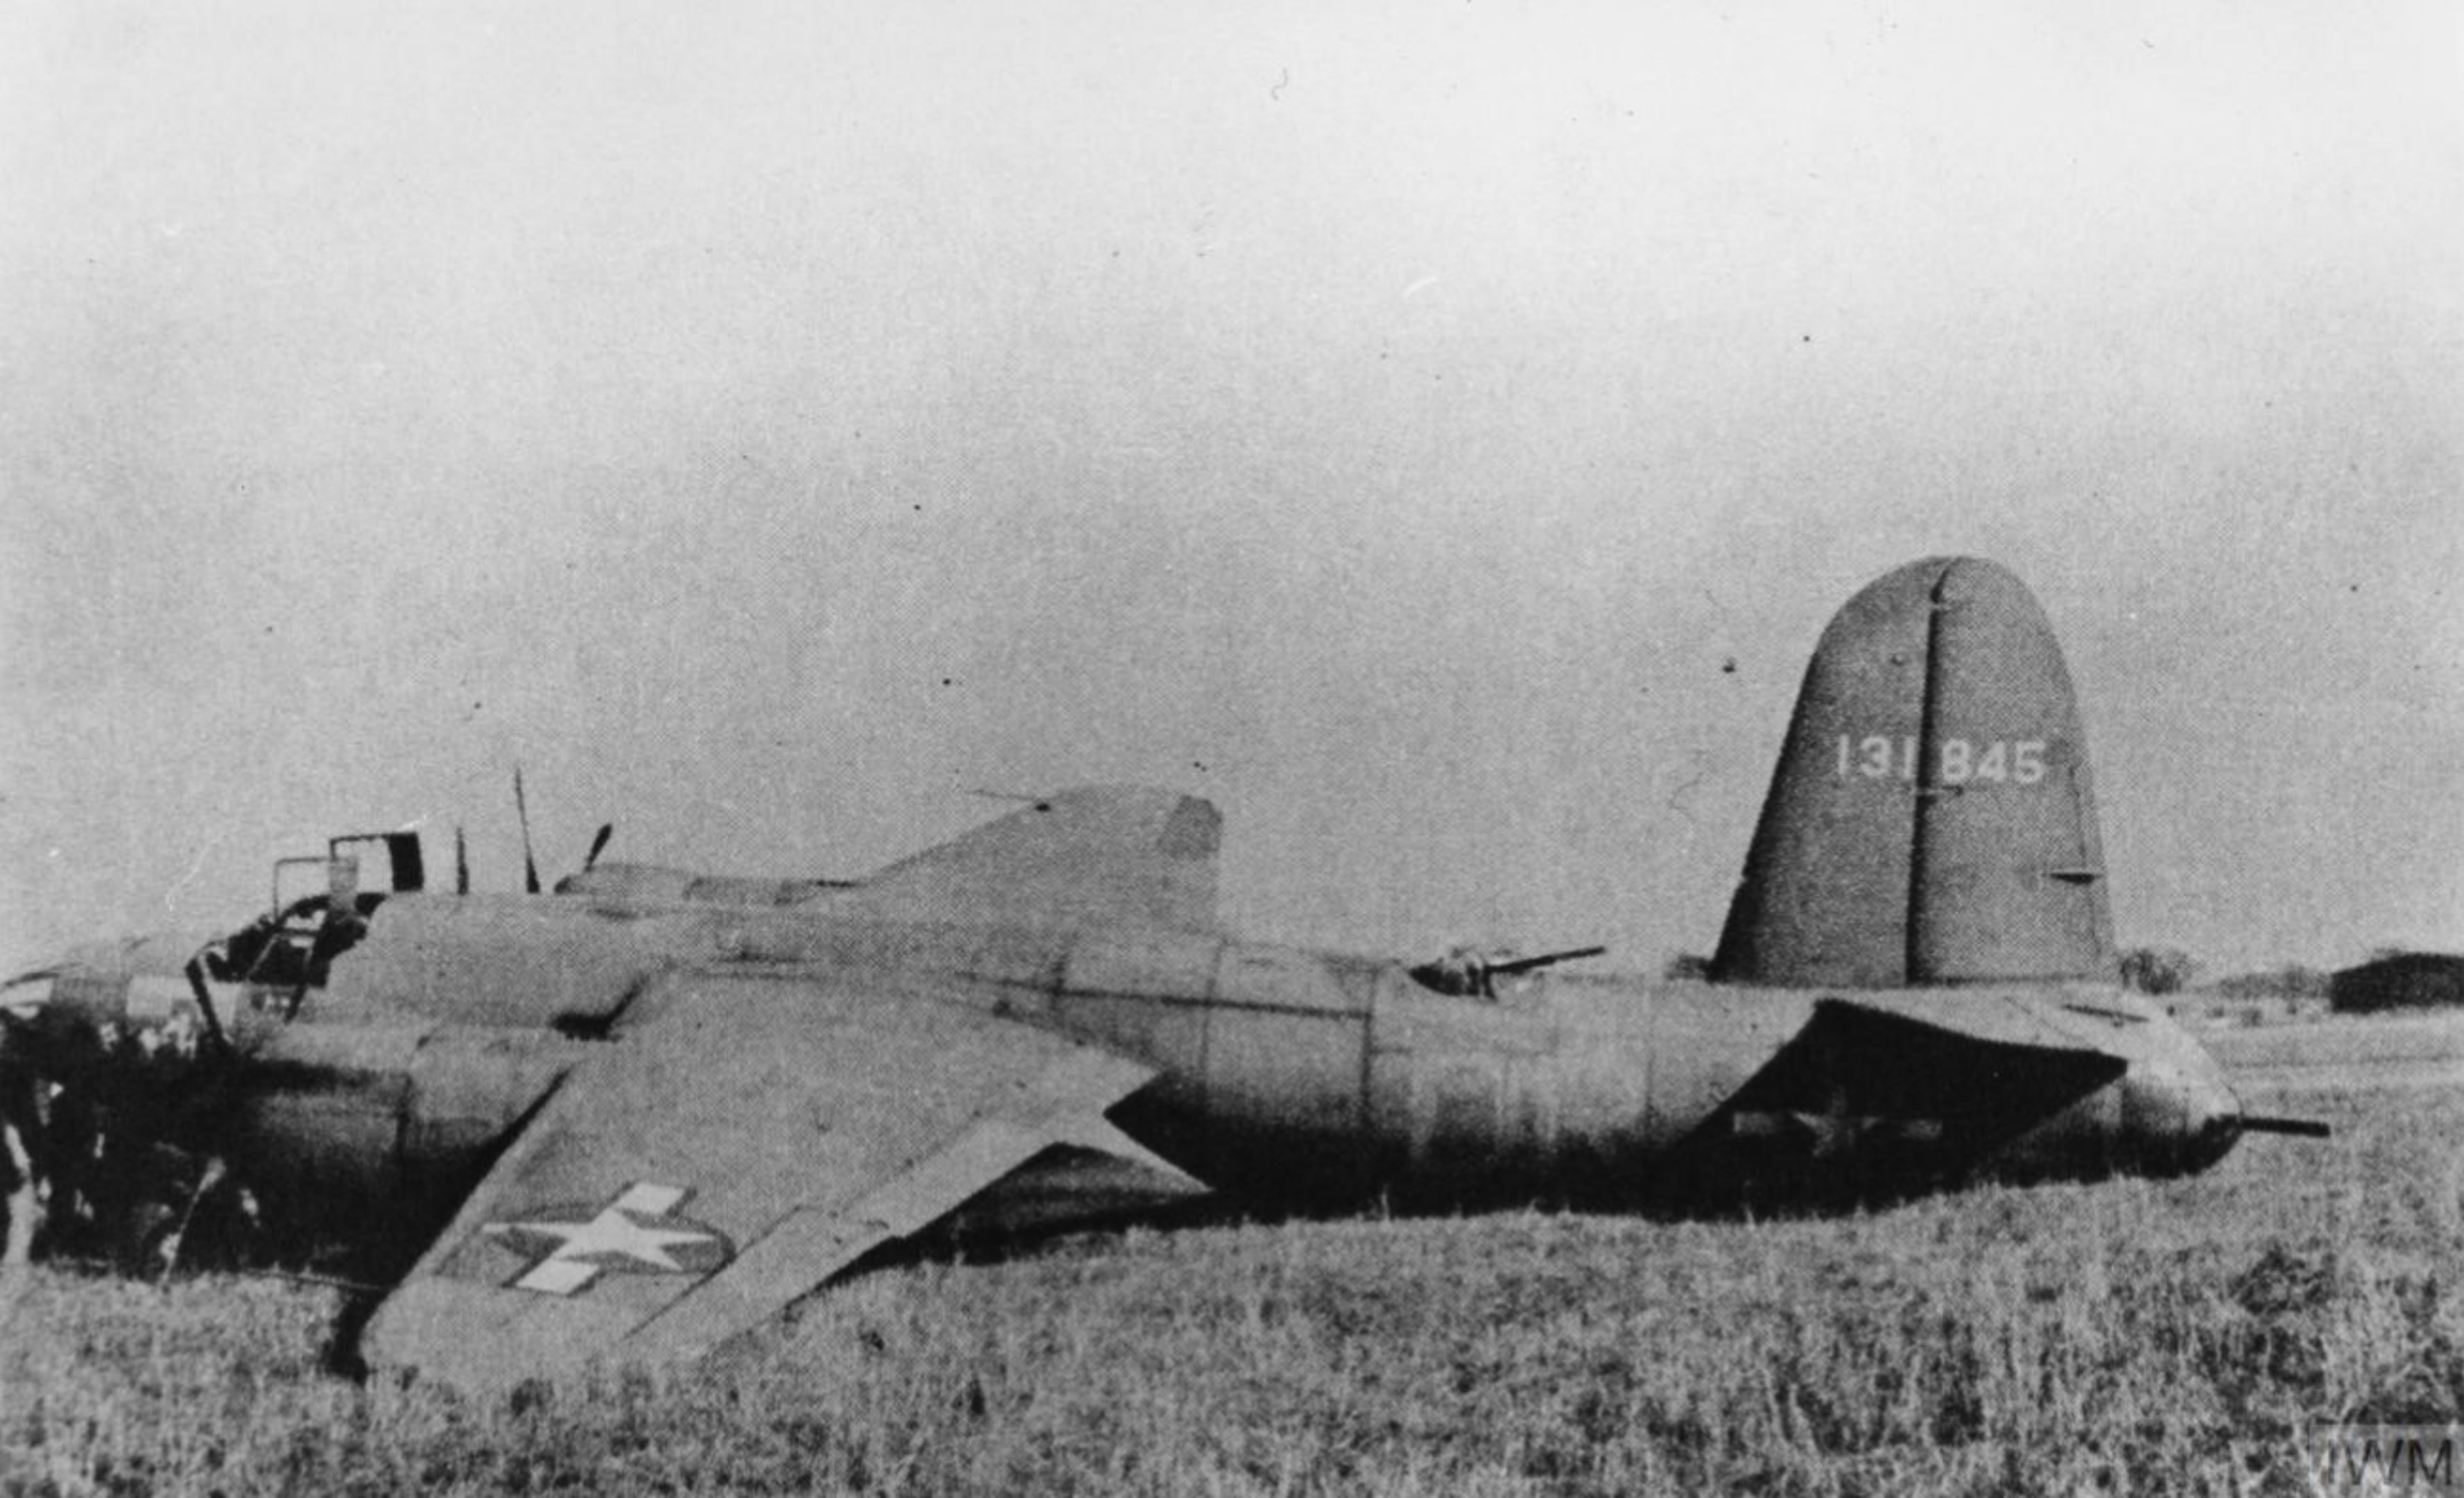 41 31845 B 26B Marauder 9AF 322BG452BS DRx shot down by fighters 7 May 1944 FRE4528